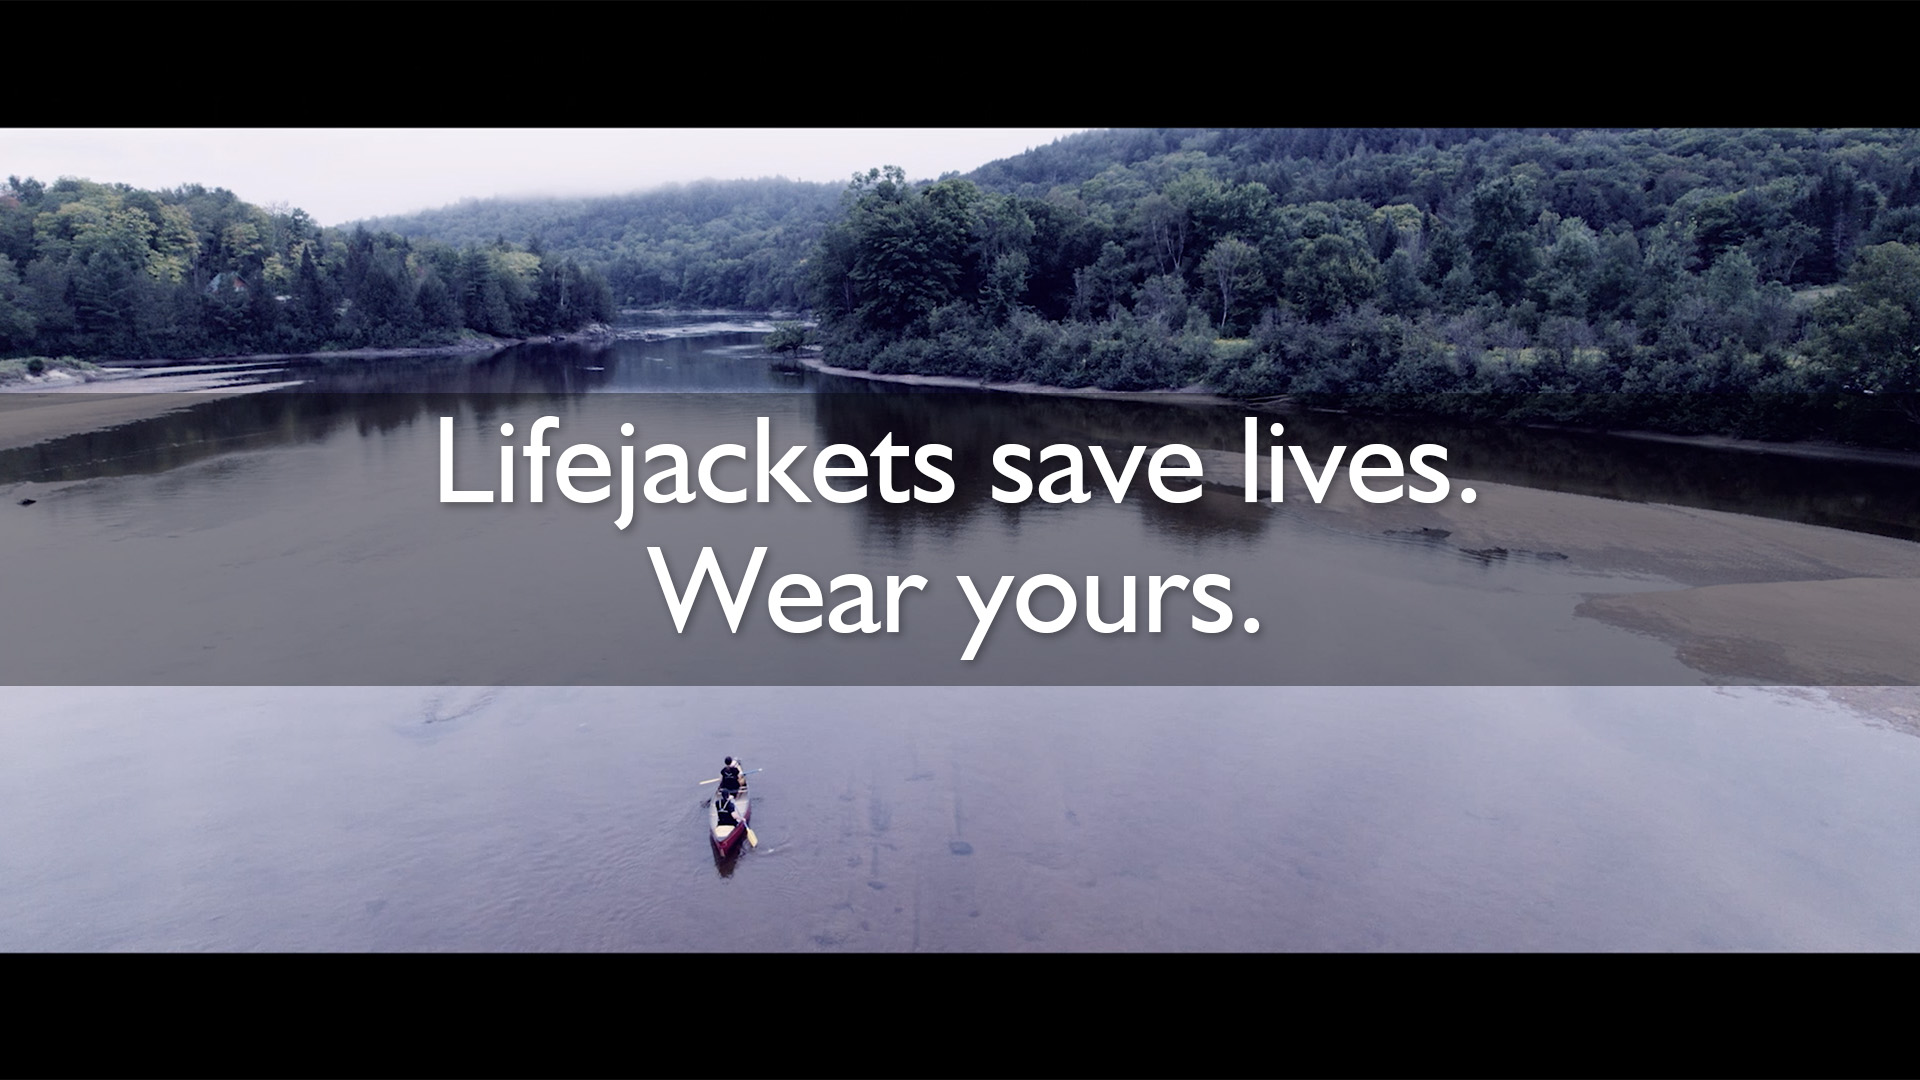 Lifejackets save lives. Wear yours.